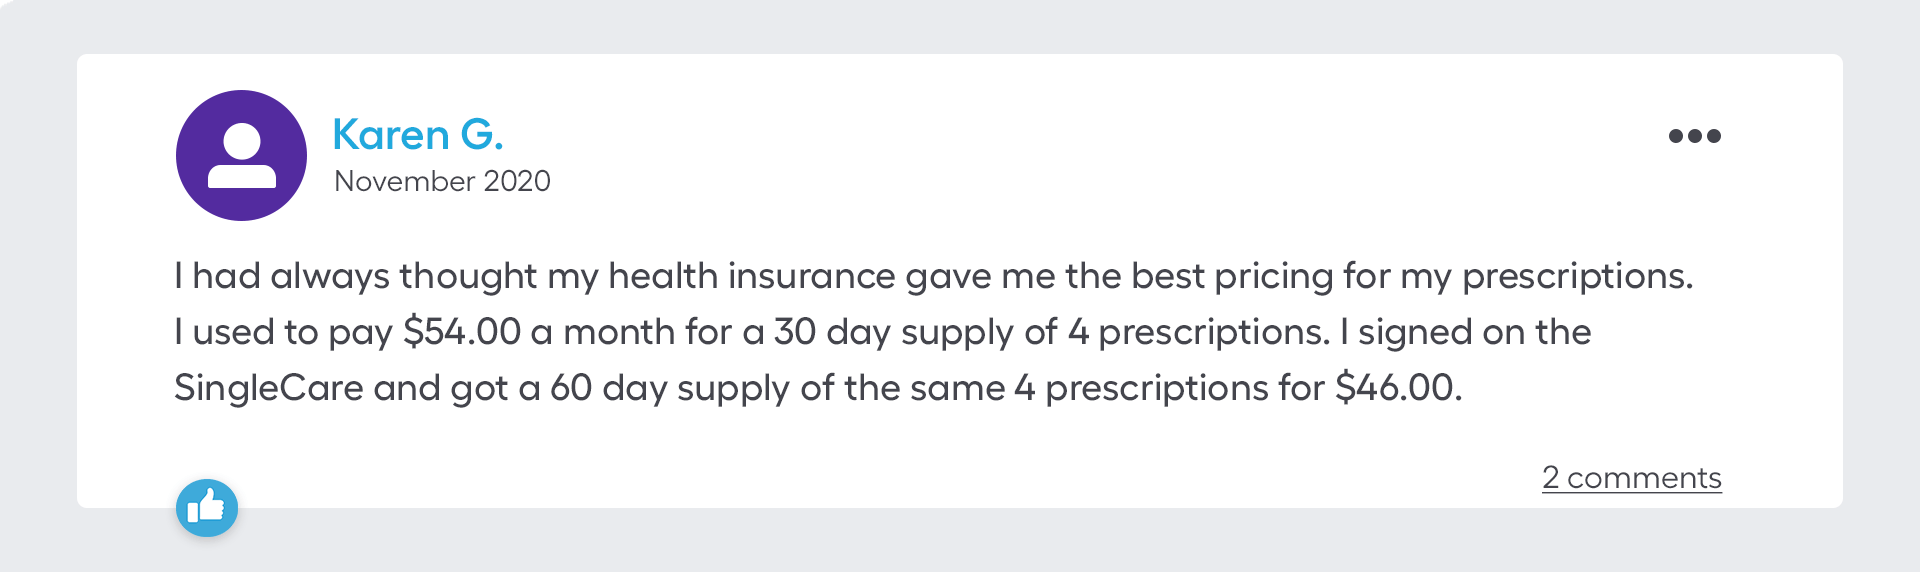 I had always thought my health insurance gave me the best pricing for my prescriptions. I used to pay $54.00 a month for a 30 day supply of 4 prescriptions. I signed on the SingleCare and got a 60 day supply of the same 4 prescriptions for $46.00.